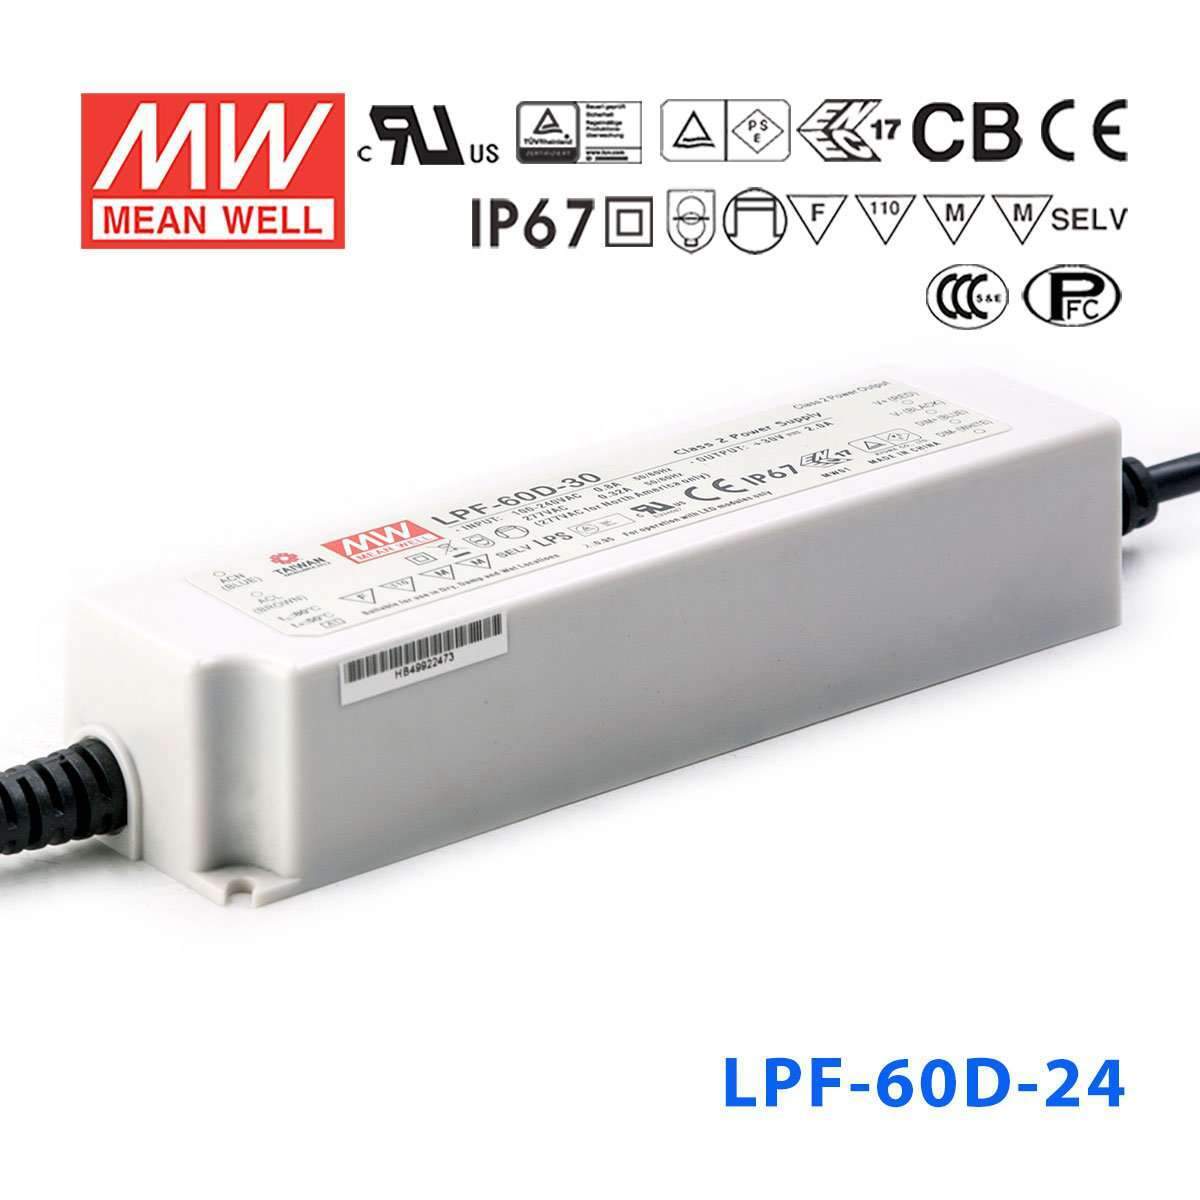 Mean Well LPF-60D-24 Power Supply 60W 24V - Dimmable